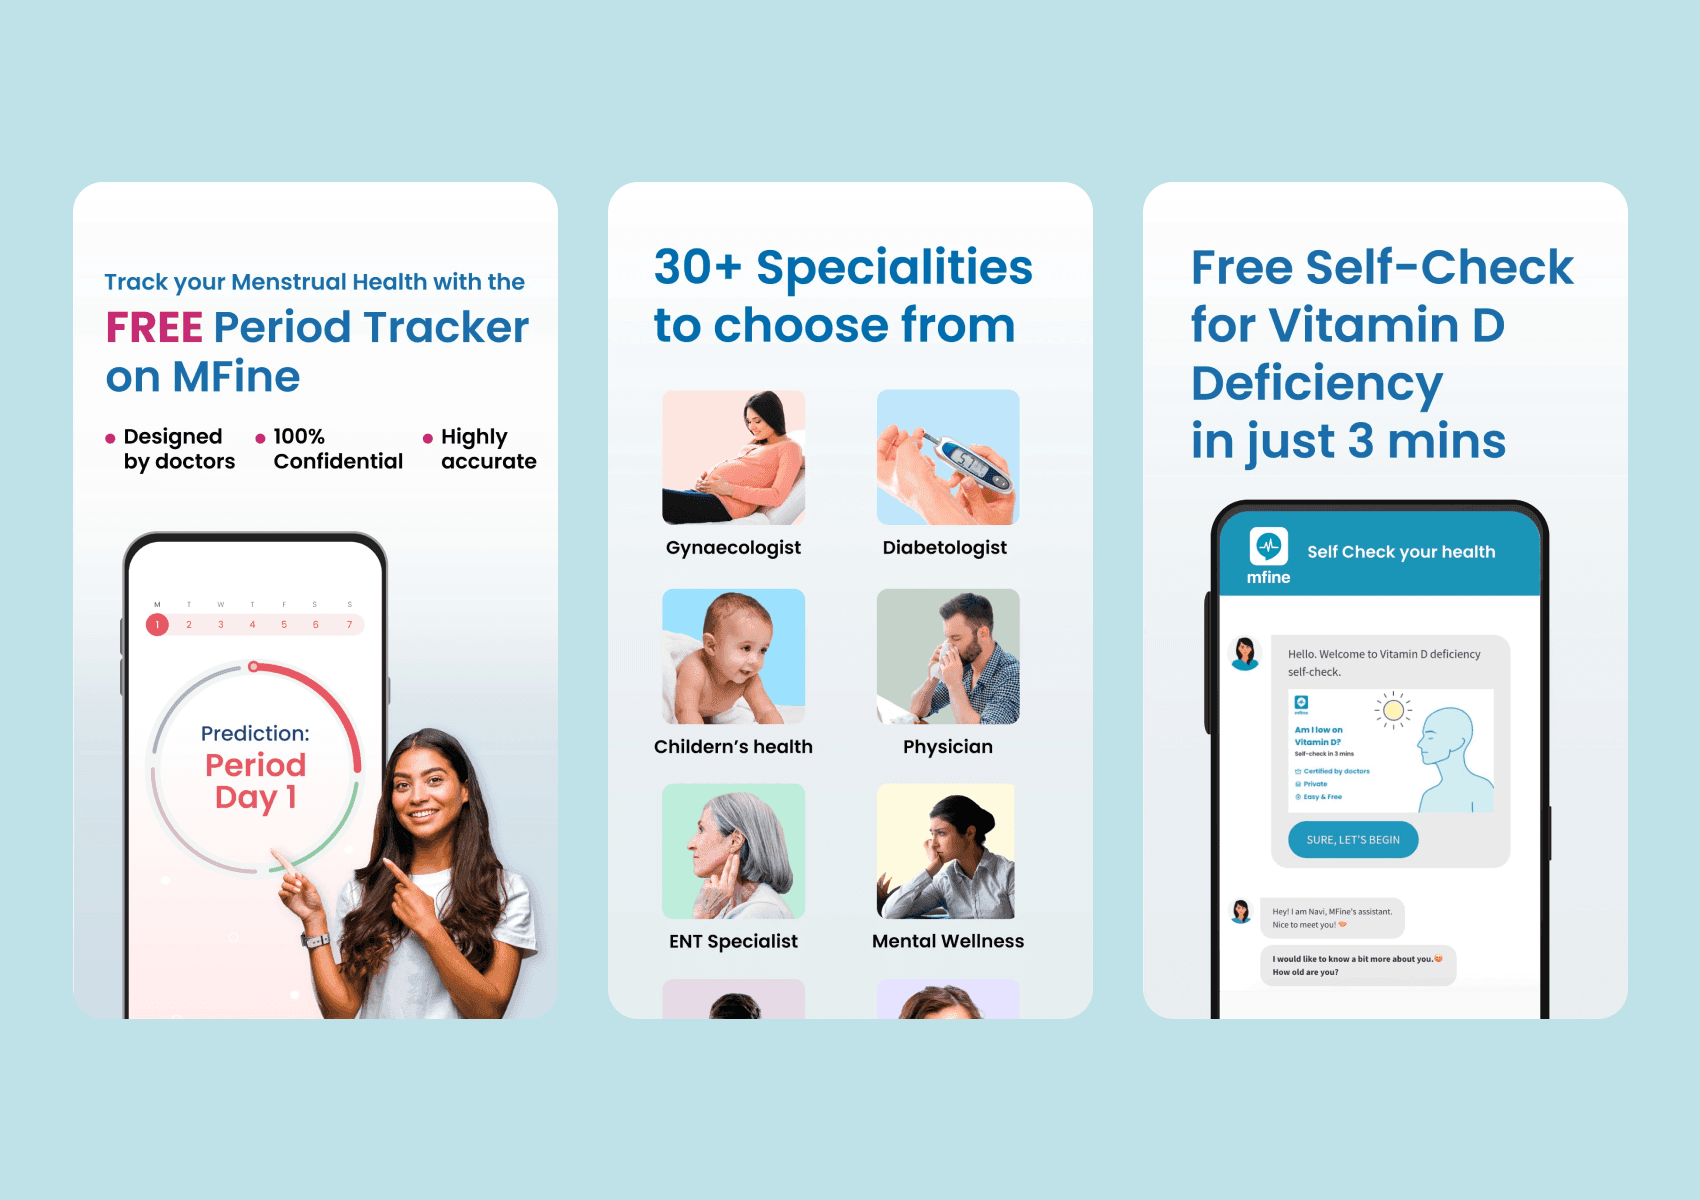 telehealth platform that connects users with top doctors and specialists from various medical fields